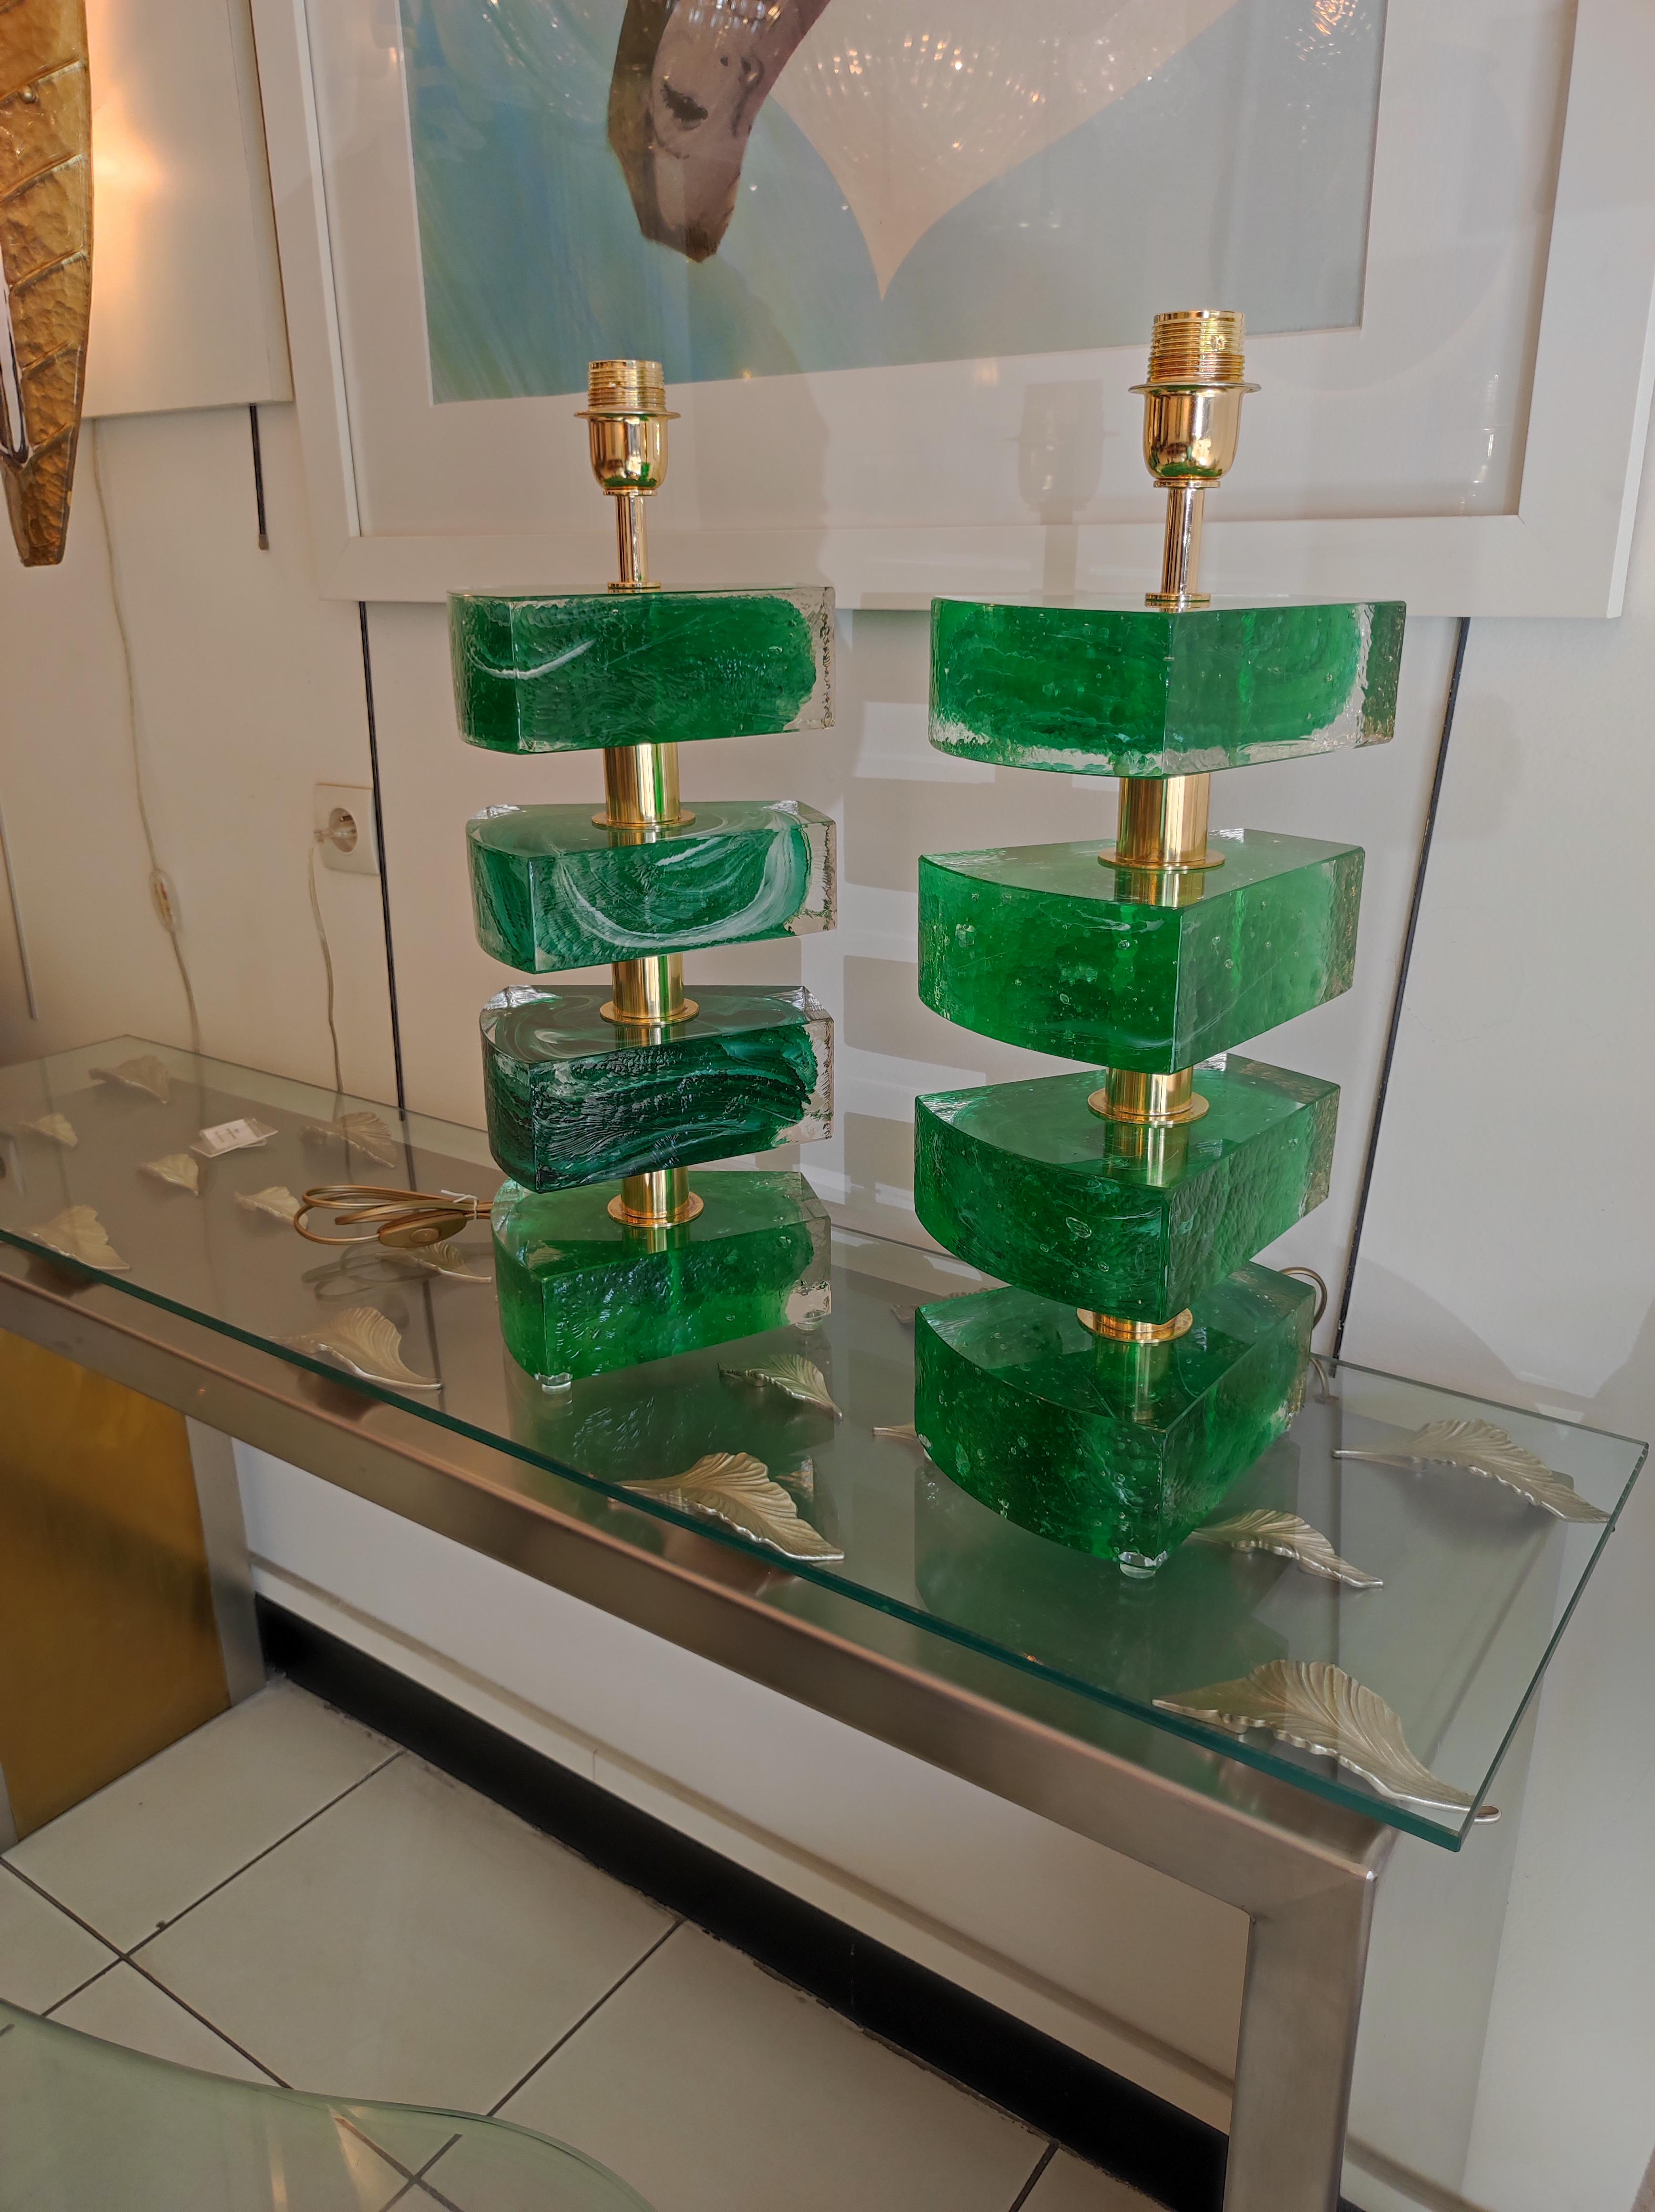 Pair of colored Murano glass (green and transparent) table lamps, in excellent condition.
E27 bulbs compatible US E26